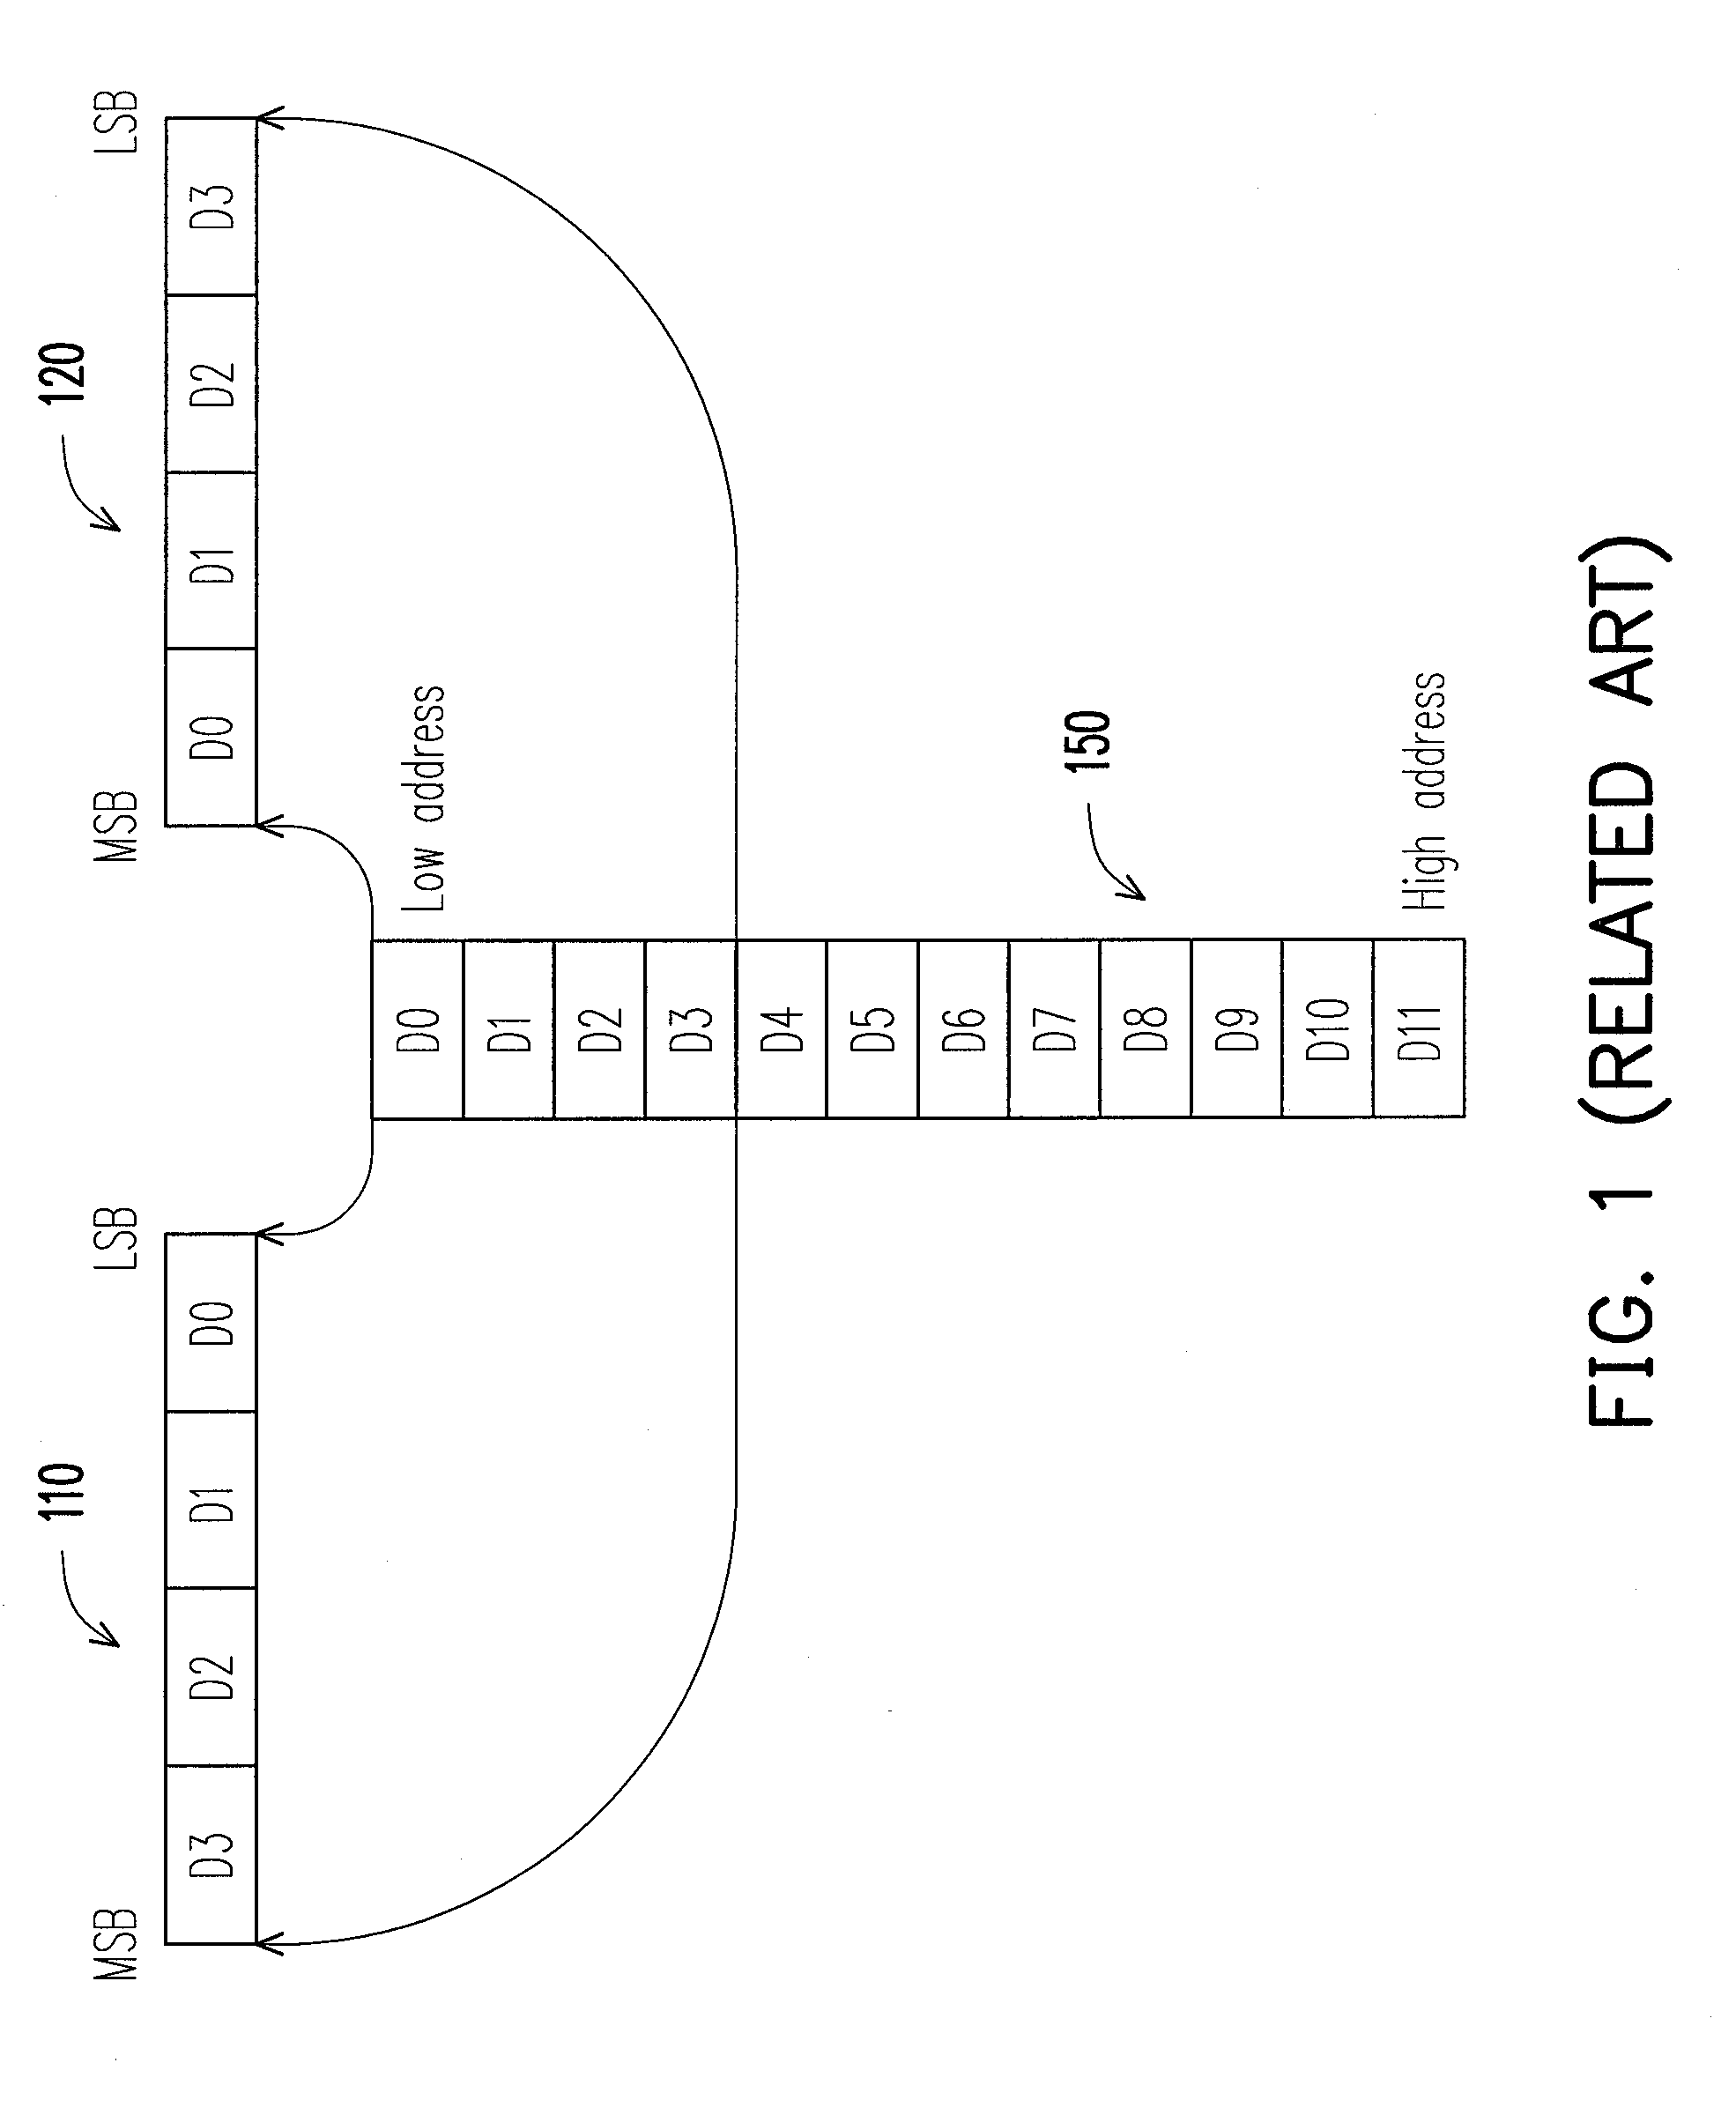 Data processing engine with integrated data endianness control mechanism